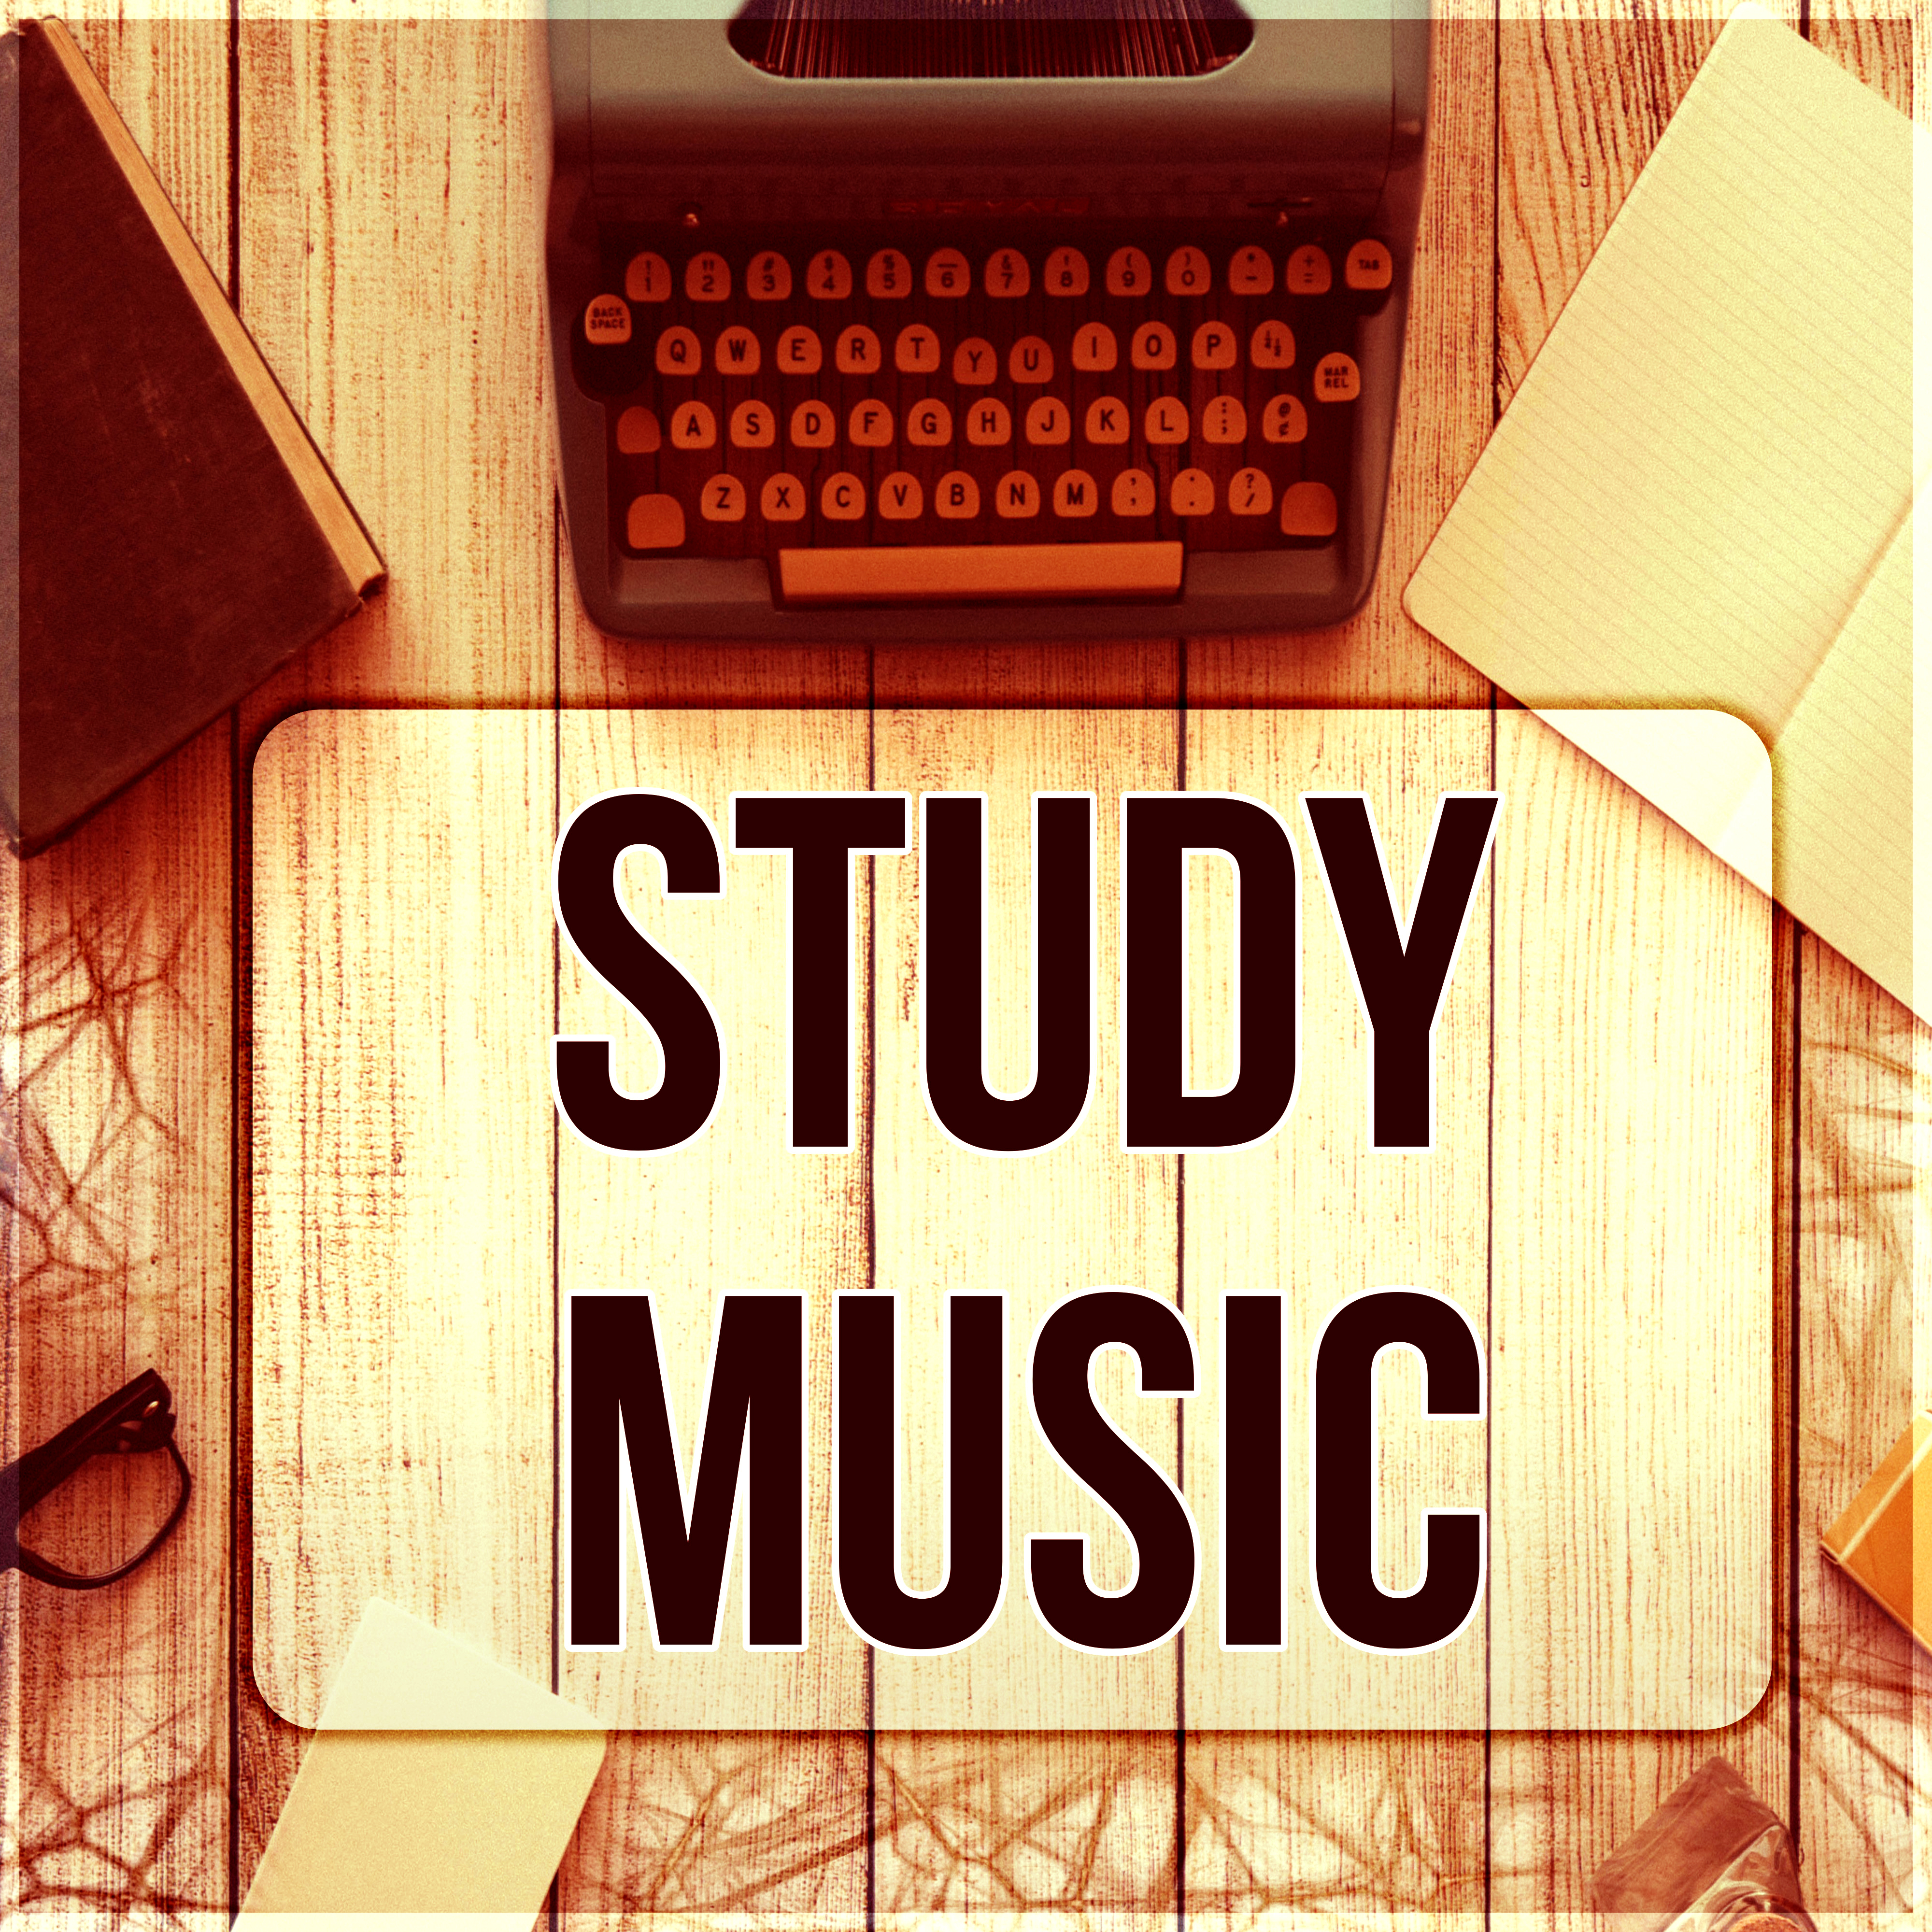 Study Music  Homework, Music for Reading, Exam Study, Soft Piano Music for Brain Power, Improve Concentration, Focus, Background Music